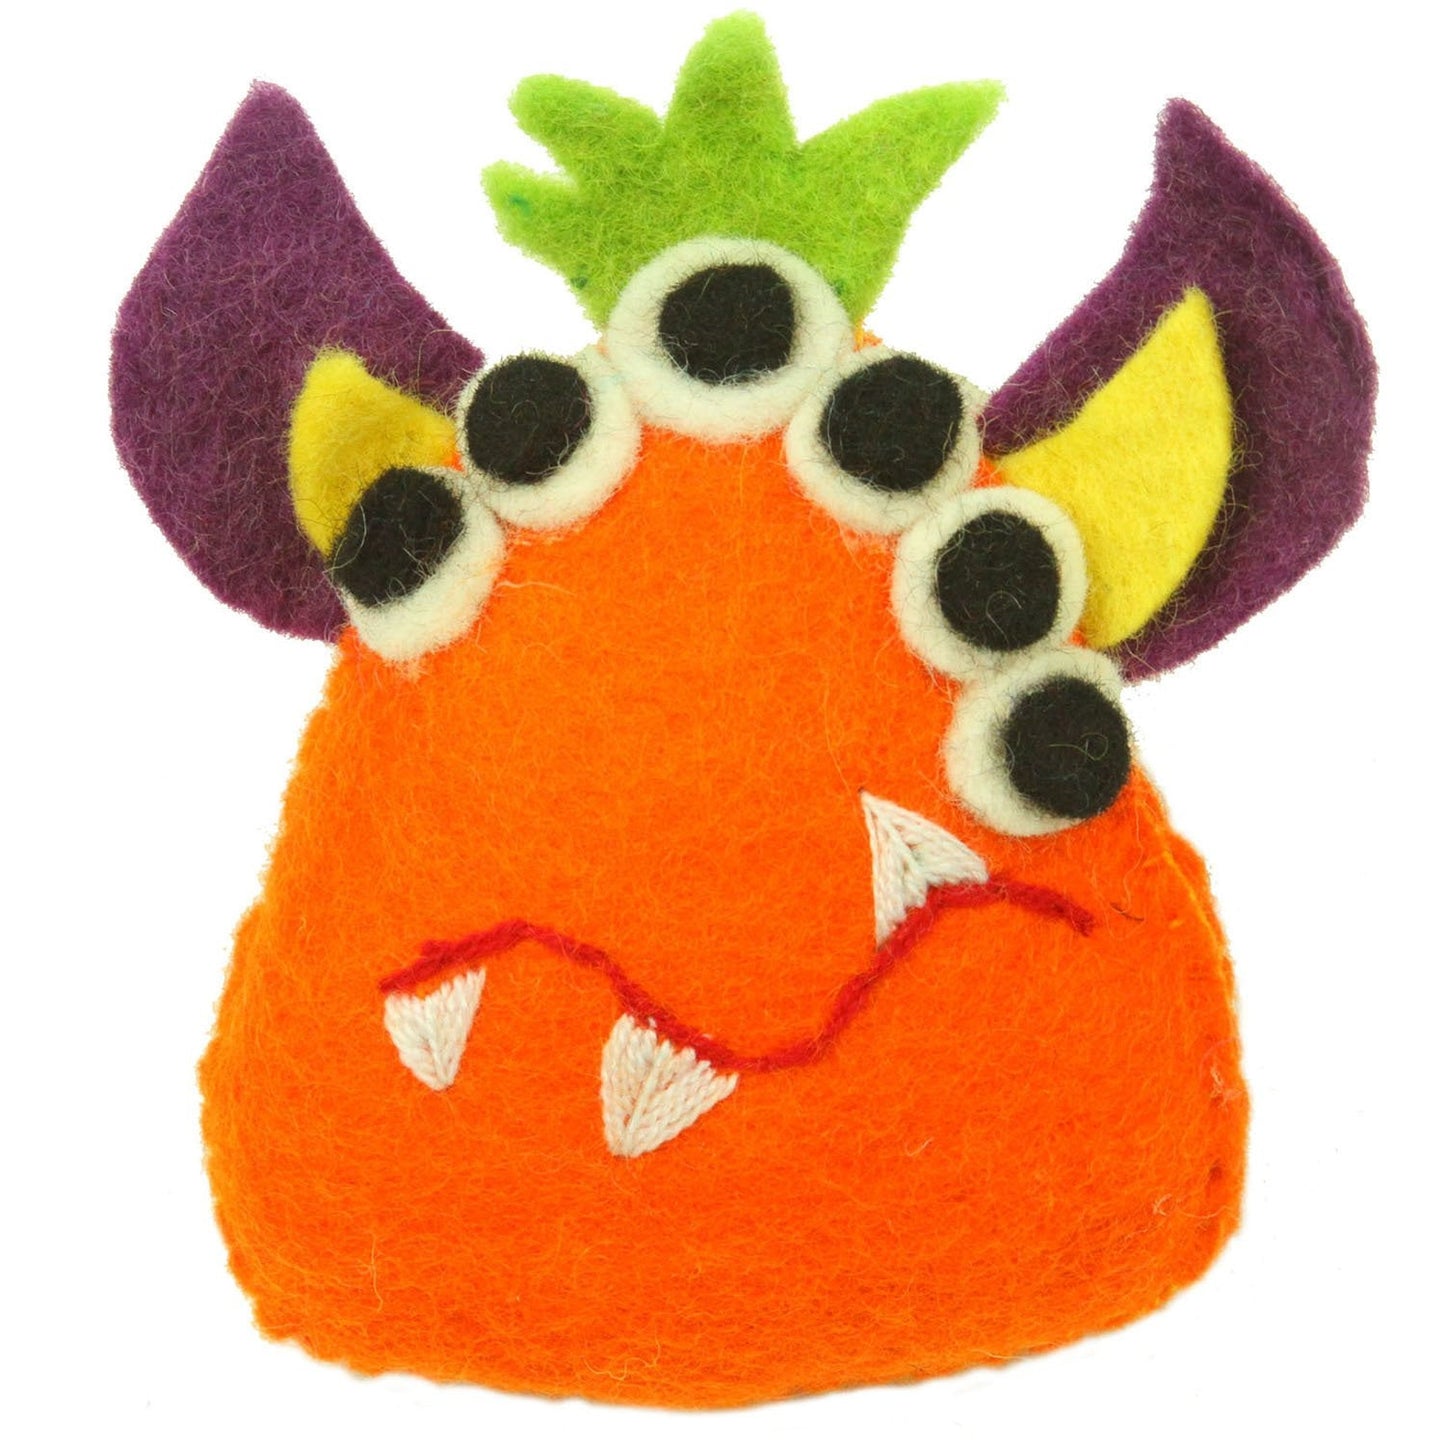 hand-felted-orange-tooth-monster-with-many-eyes-global-groove